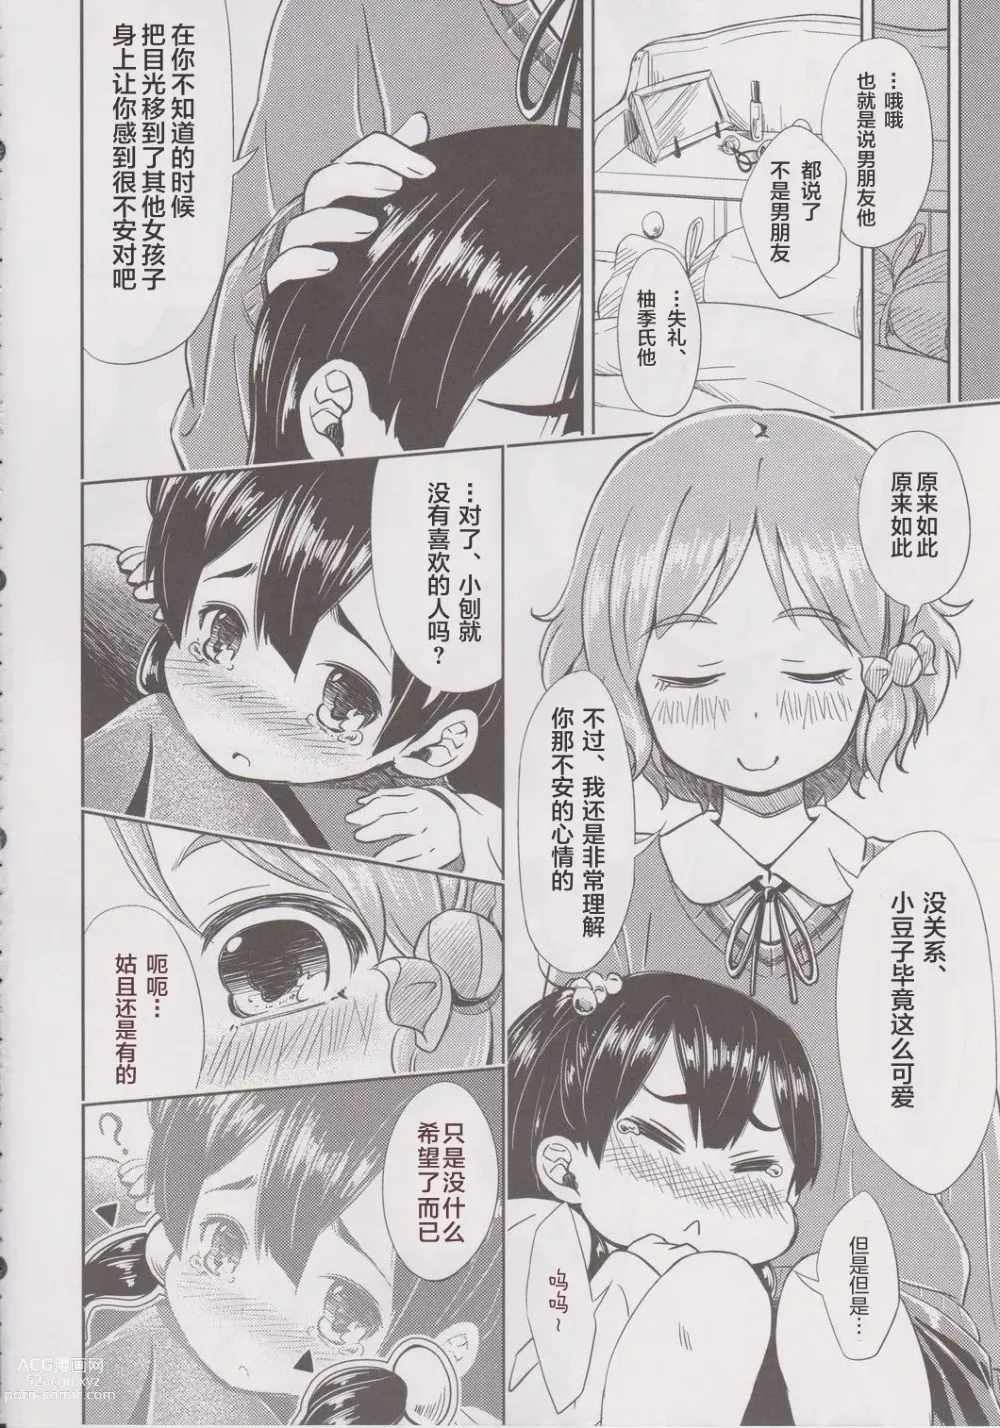 Page 7 of doujinshi Lovely Girls Lily vol. 6